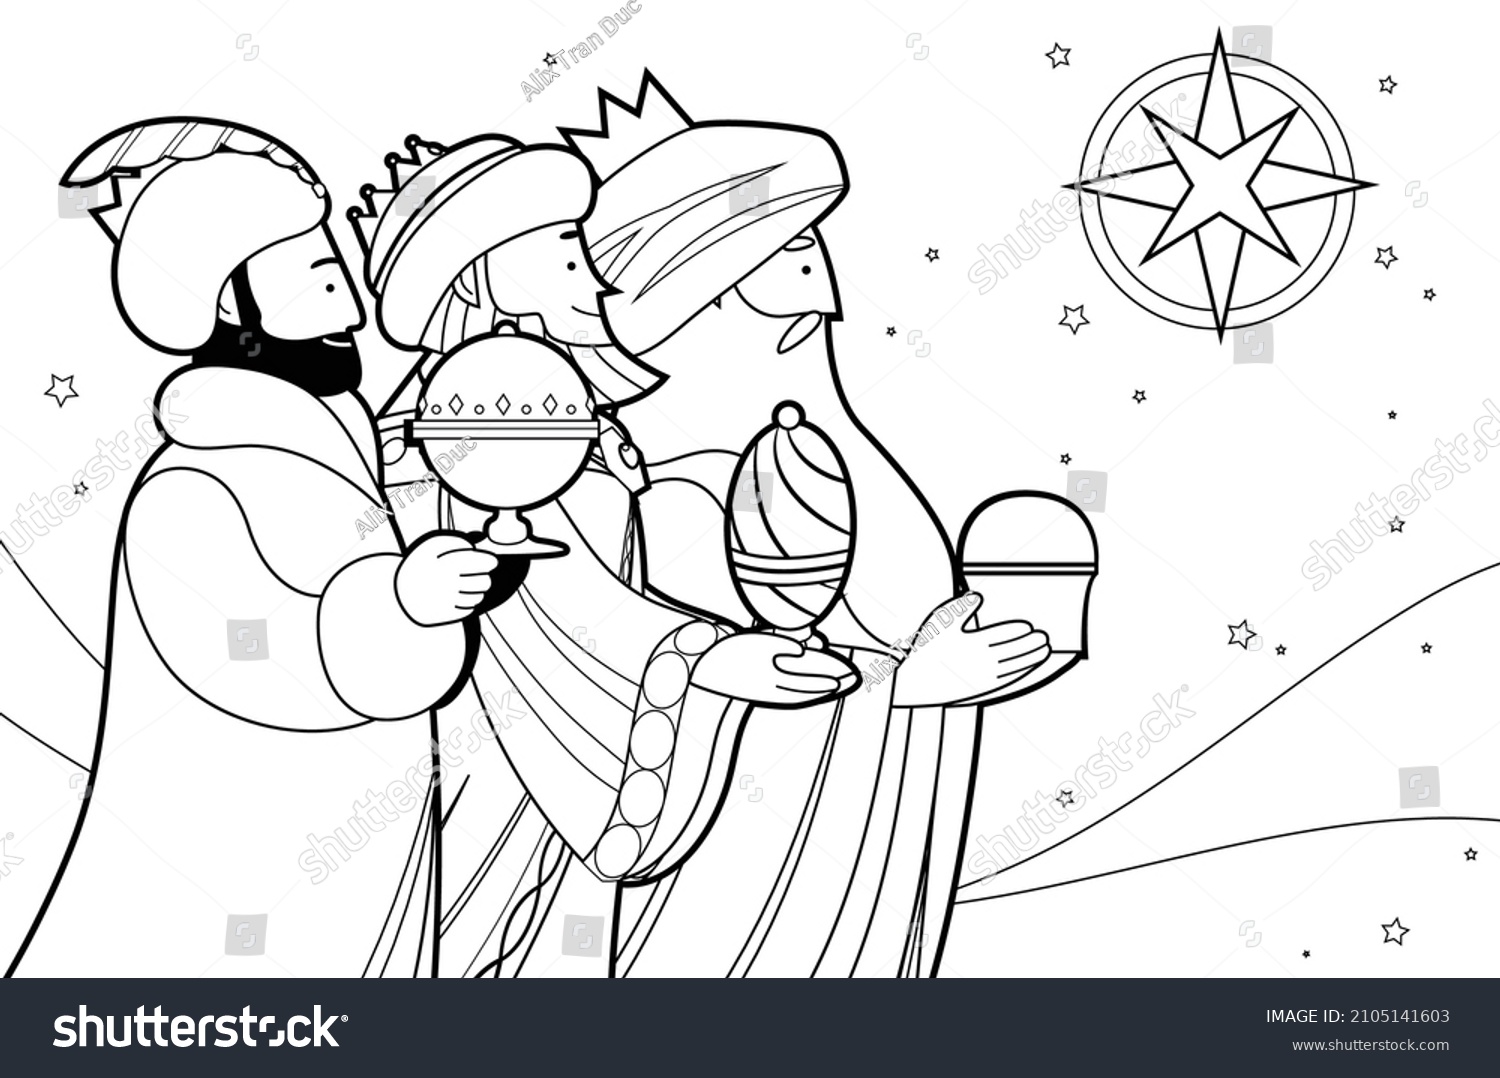 Three wise men outline vector coloring stock vector royalty free